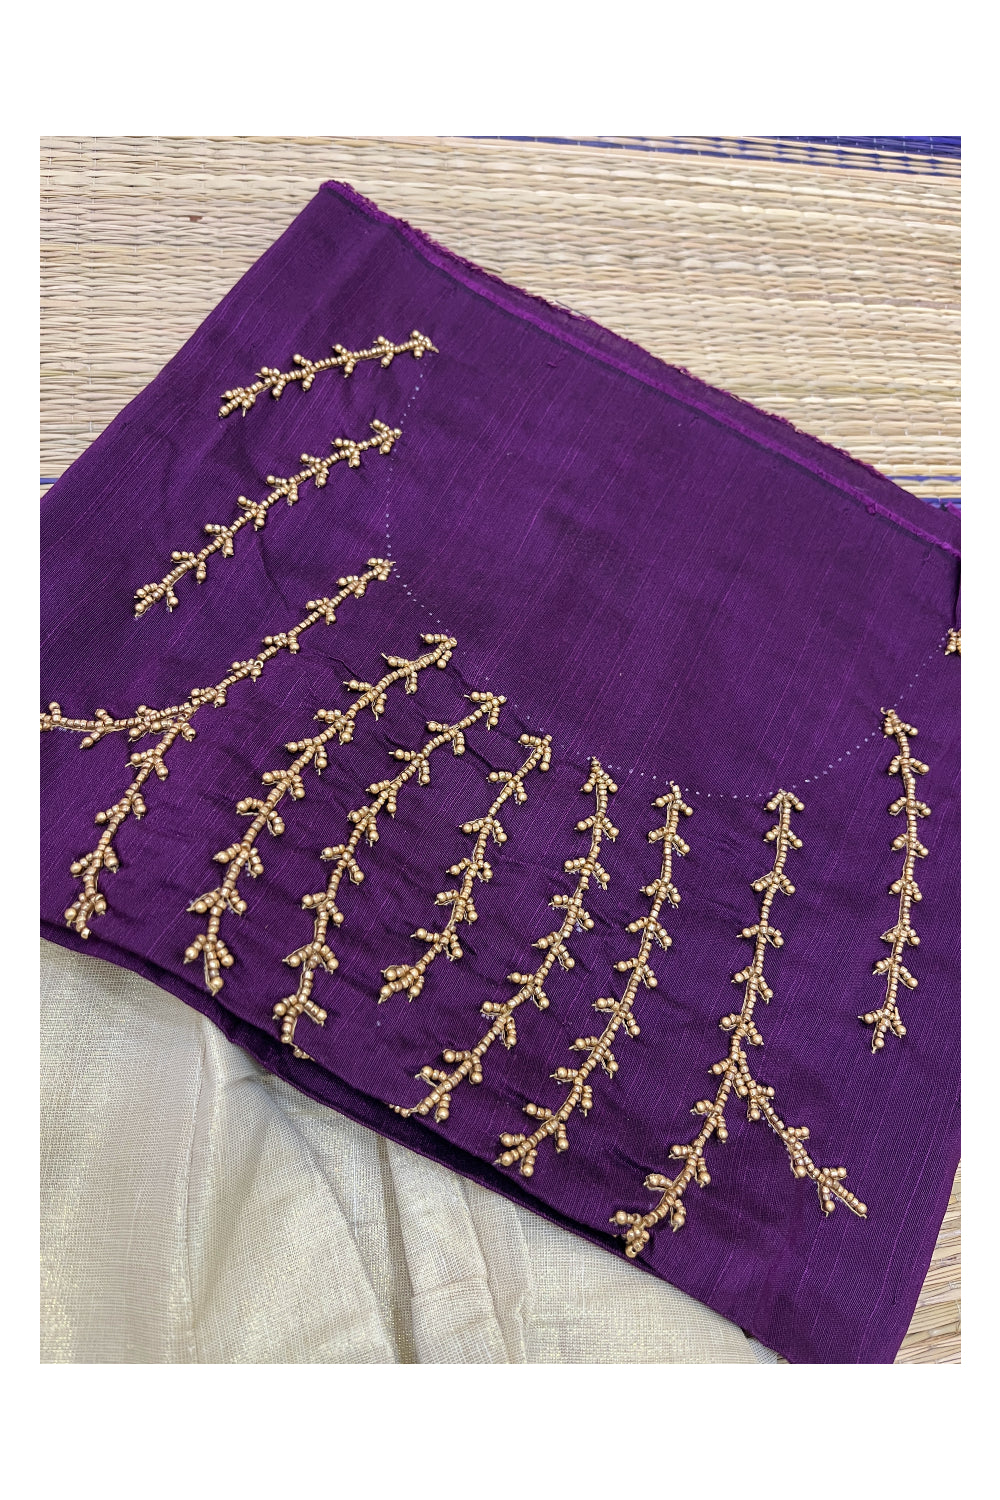 Semi Stitched Pavada Blouse with Tissue and Purple Bead Works